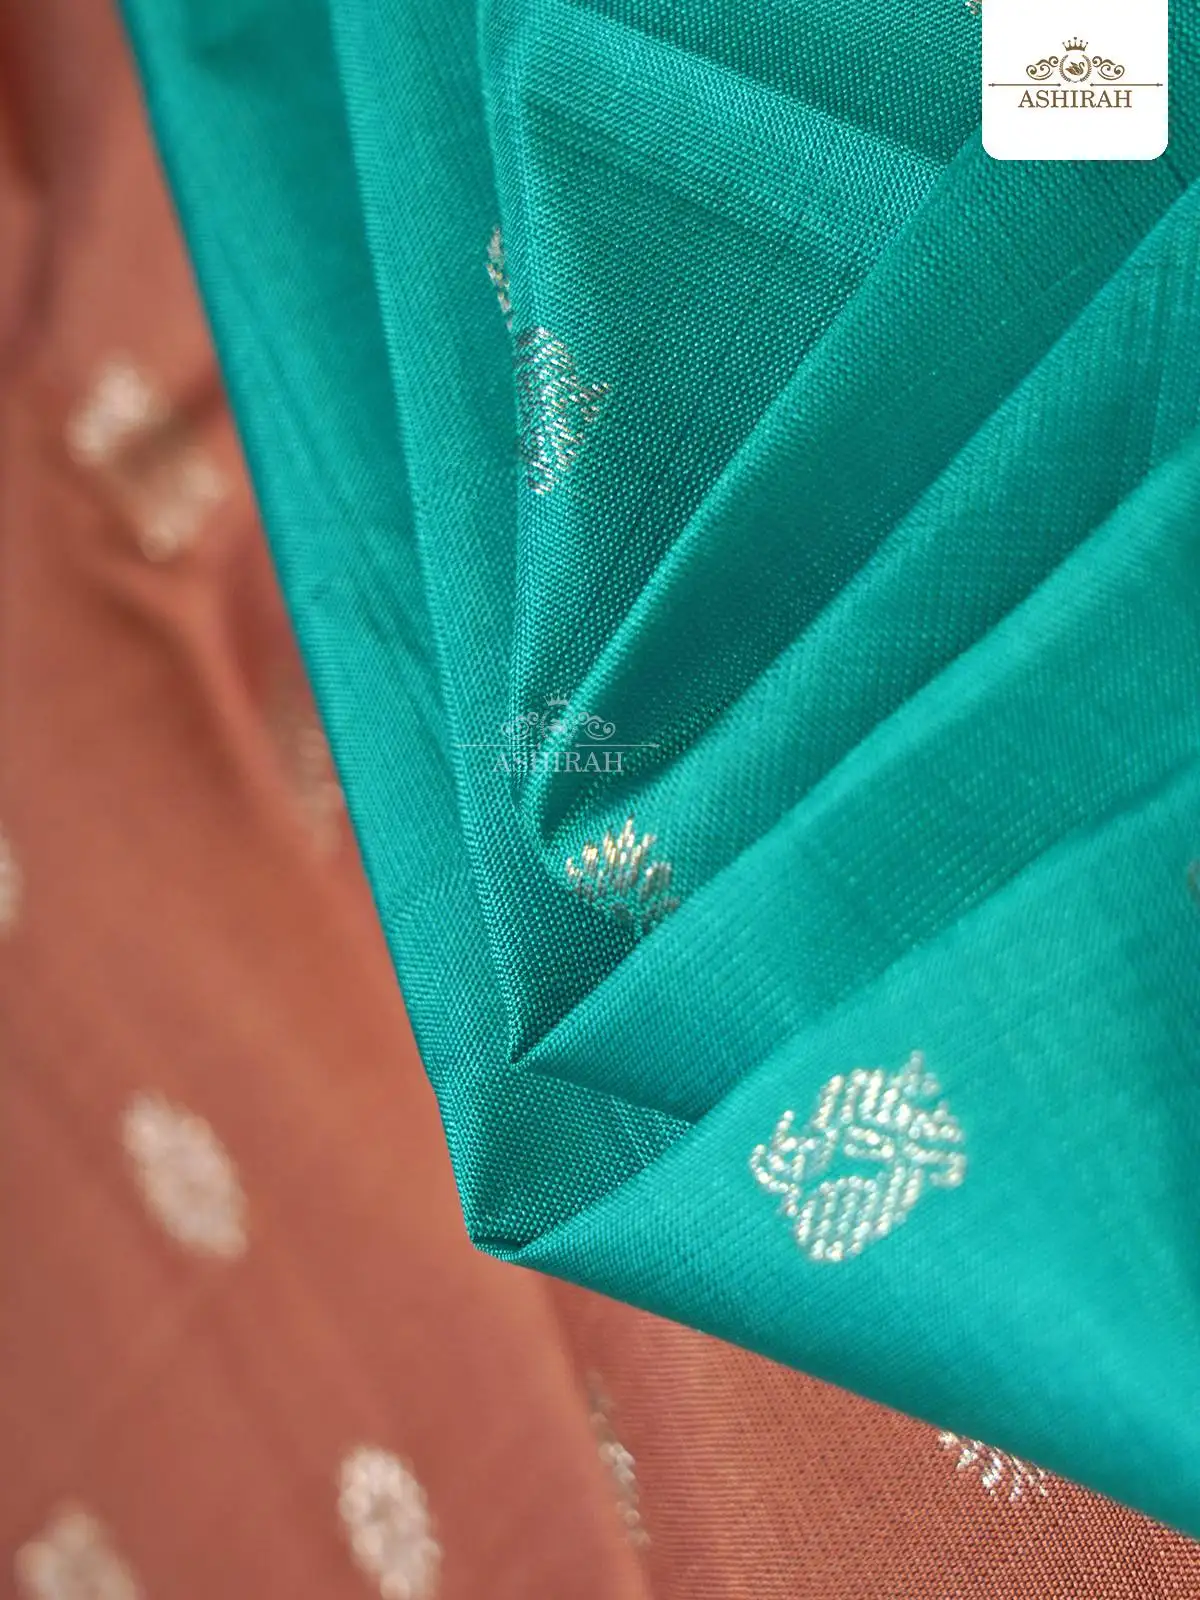 Light Brown Pure Kanchipuram Silk Saree With Peacock Motifs All Over The Body And Without Border